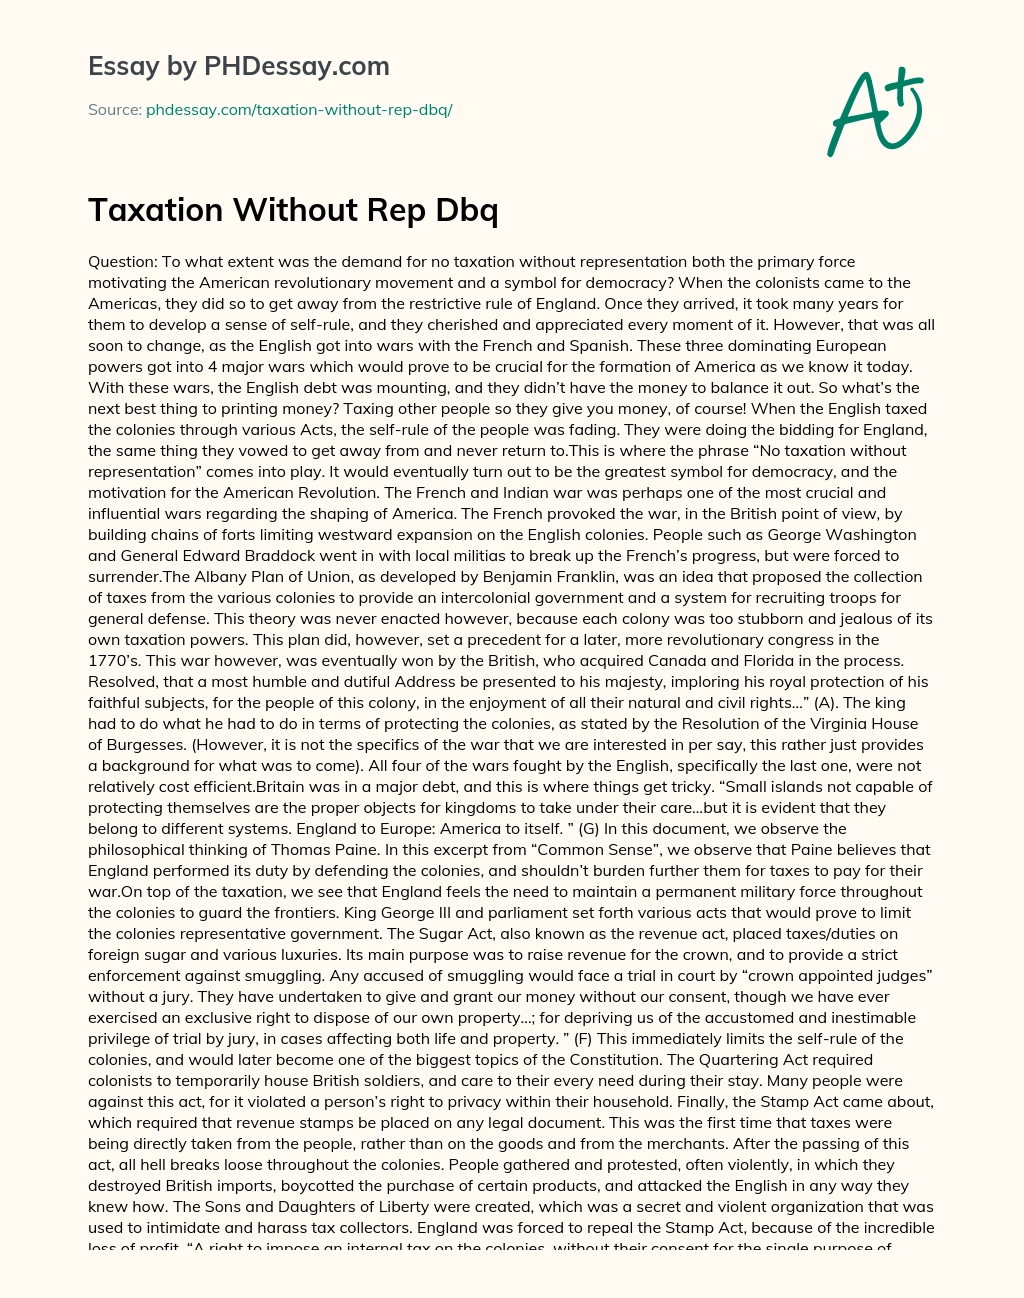 Taxation Without Rep Dbq essay